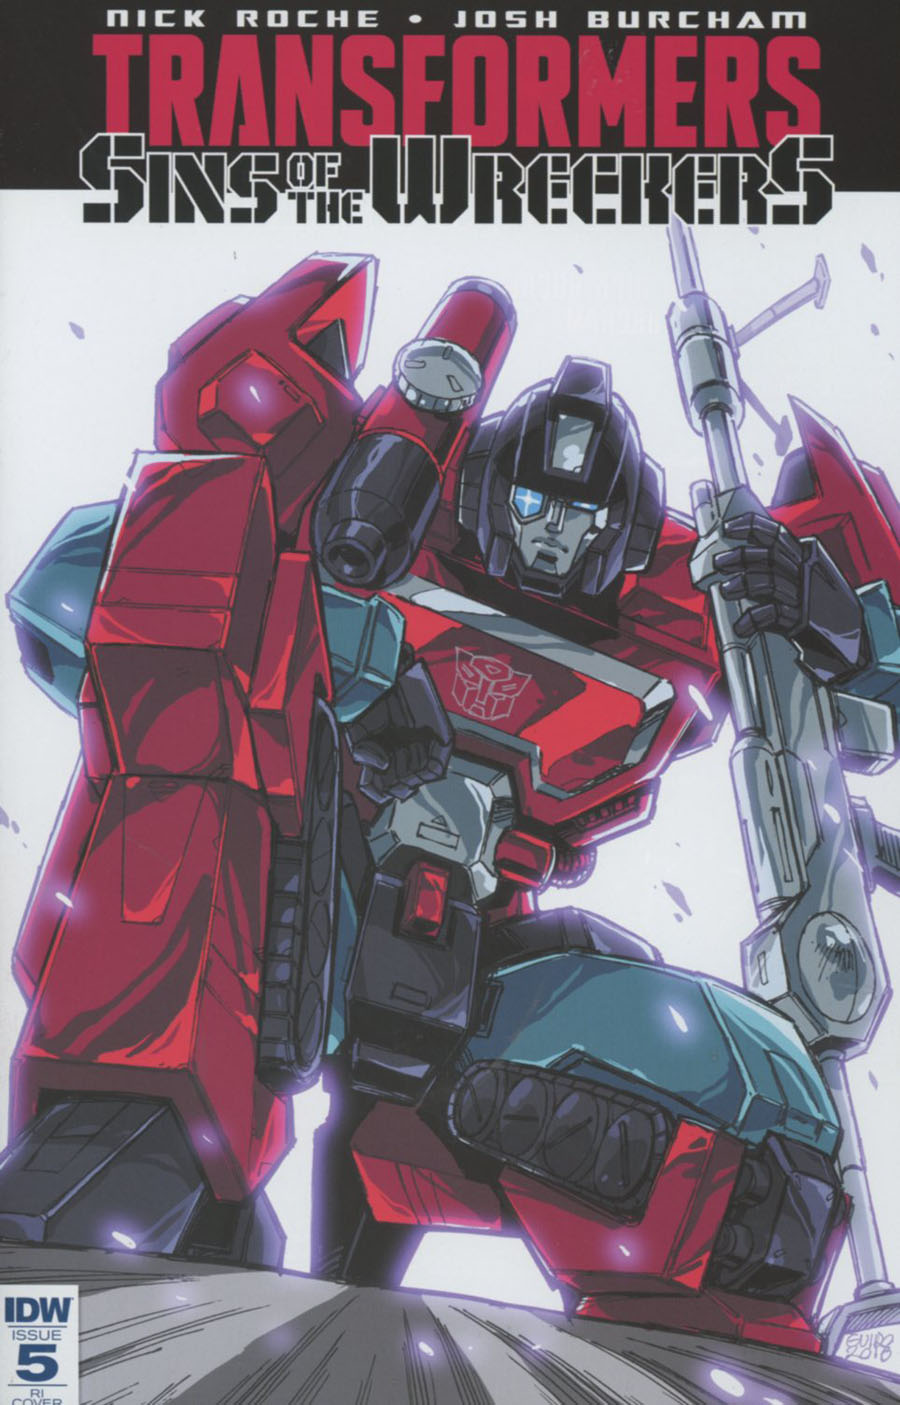 Transformers Sins Of The Wreckers #5 Cover C Incentive Guido Guidi Variant Cover